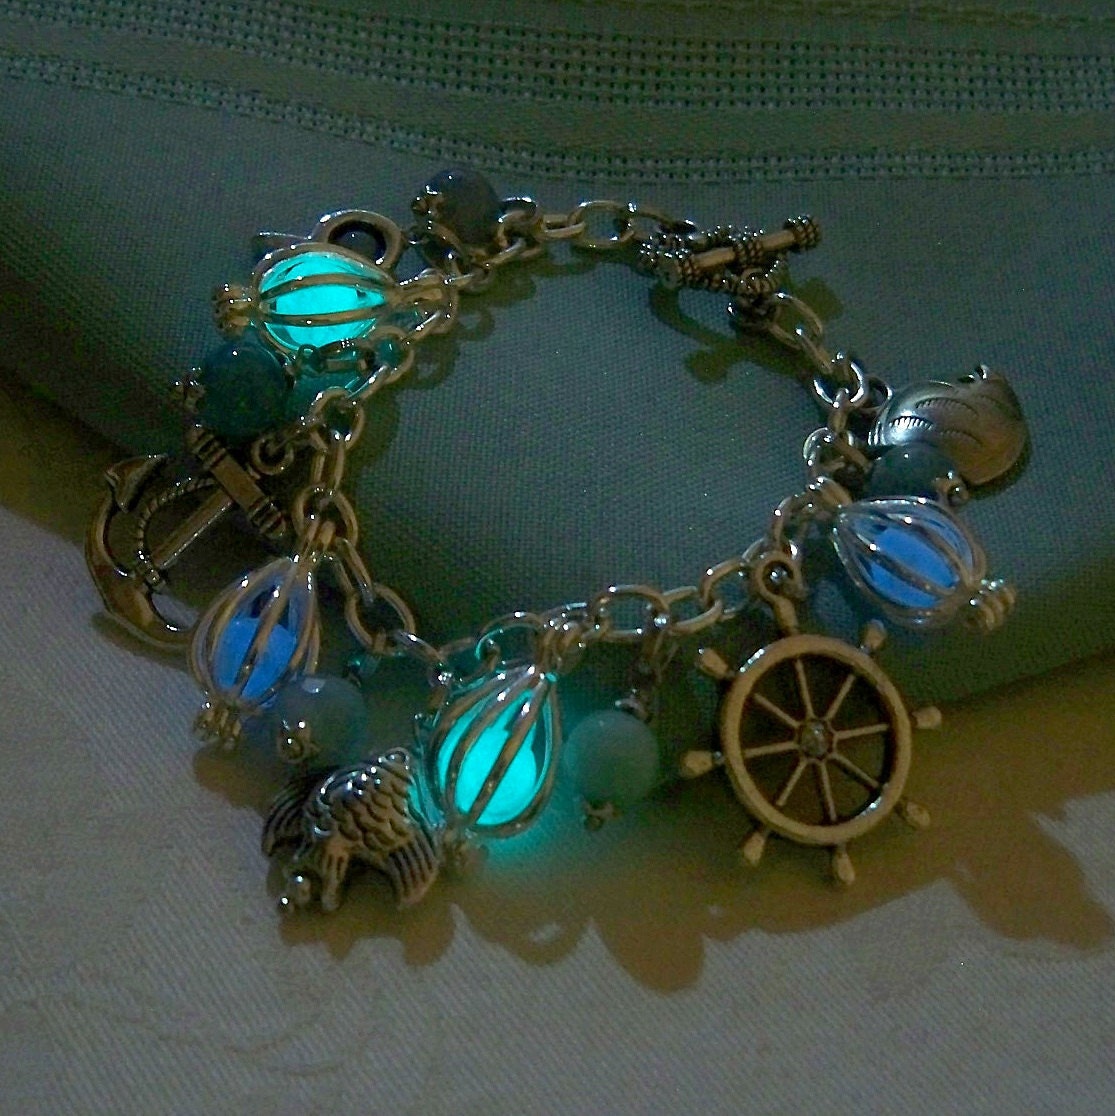 Mermaids Magic Charm Bracelet - Featuring Mini Mermaid's Magic and Ocean Inspired Charms and Gemstones - Amazing Glow in the Dark Effects - Clover13